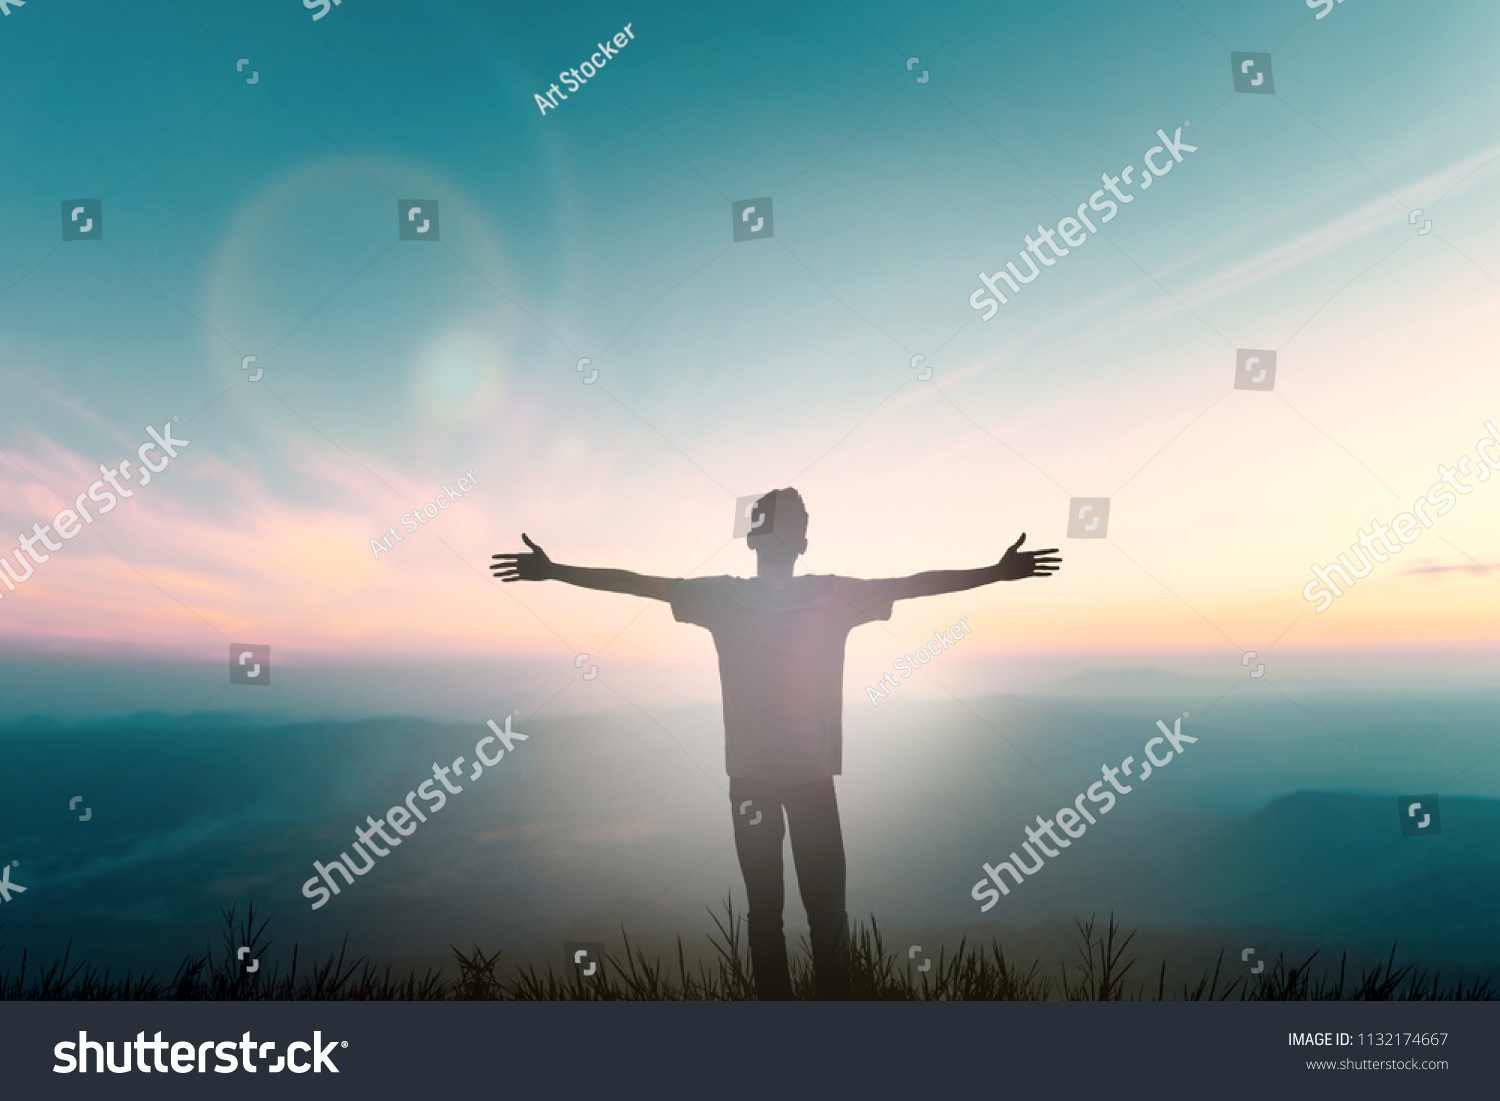 Silhouette enjoy back japanese man open arm love on sunset nature mountain reborn in hope praise God good night dawn wide. Positive yourself male success life concept breath passion wisdom wellbeing. #1132174667